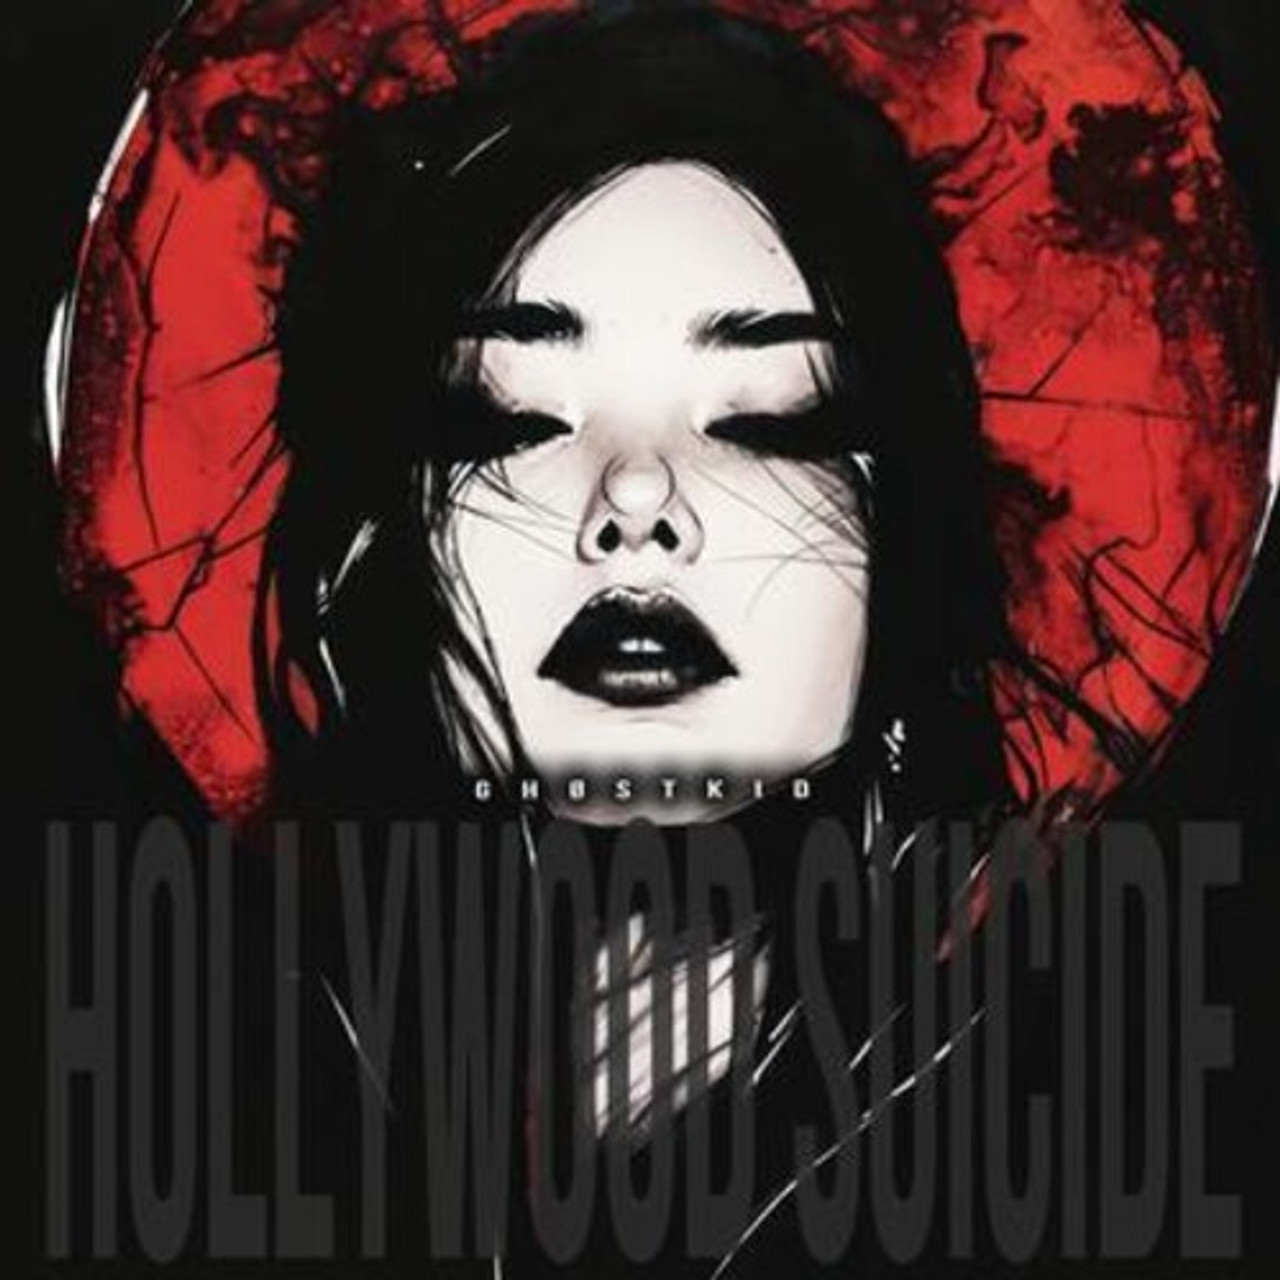 Hollywood Suicide - Ghostkid (#196588752216)